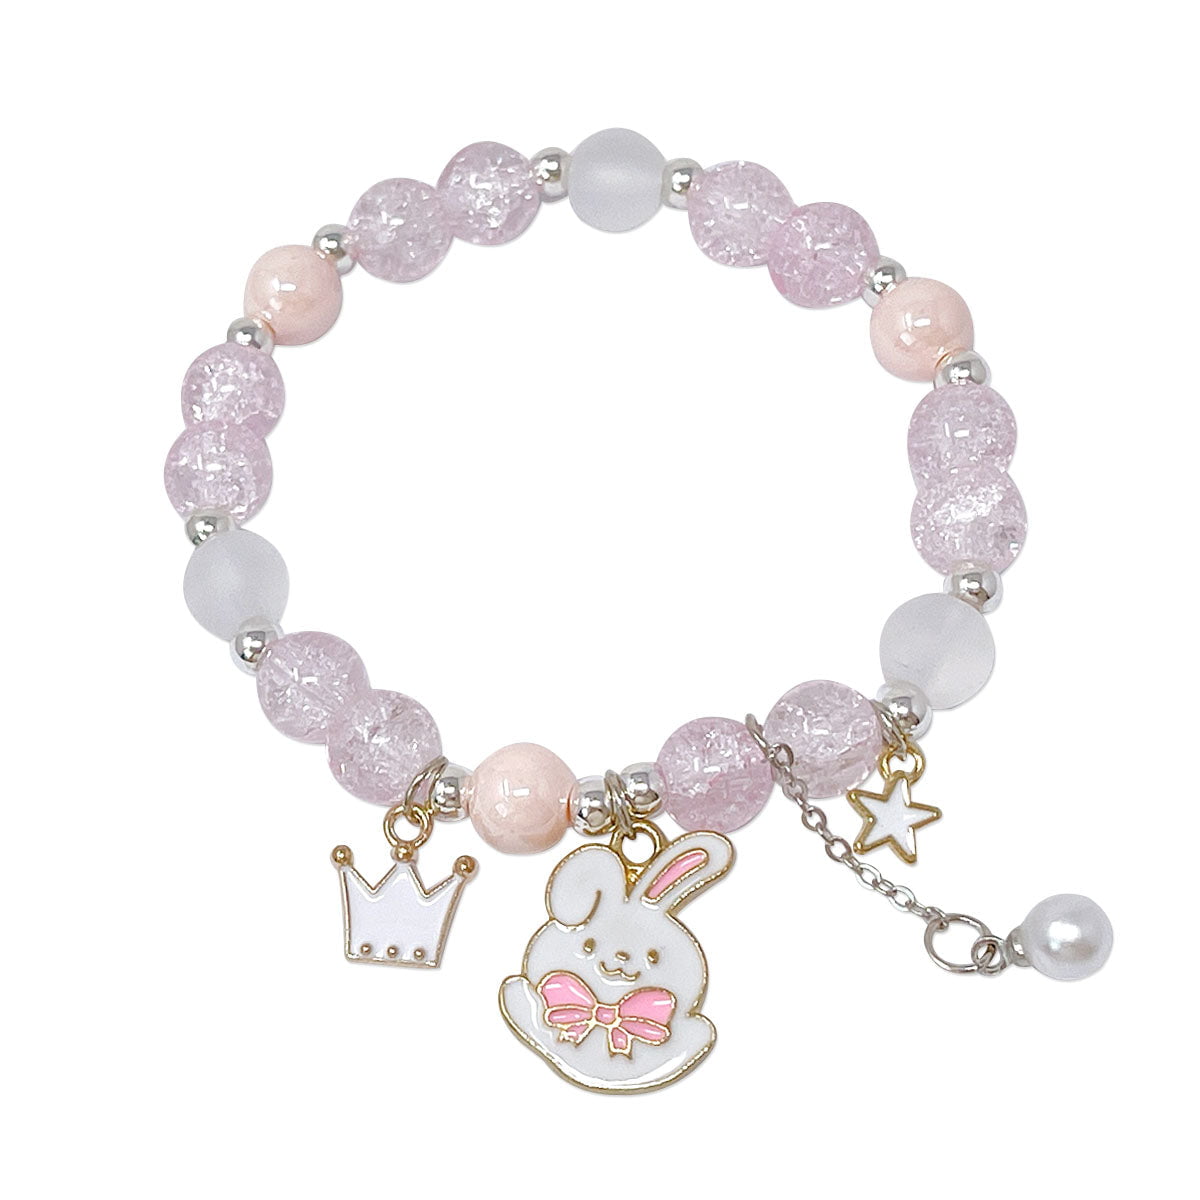 Girls Friendship Silicone Charm Bracelets With Glass Crystal Beads And  Stretch Pendants Perfect For Birthdays And Bags From Namybest, $0.72 |  DHgate.Com